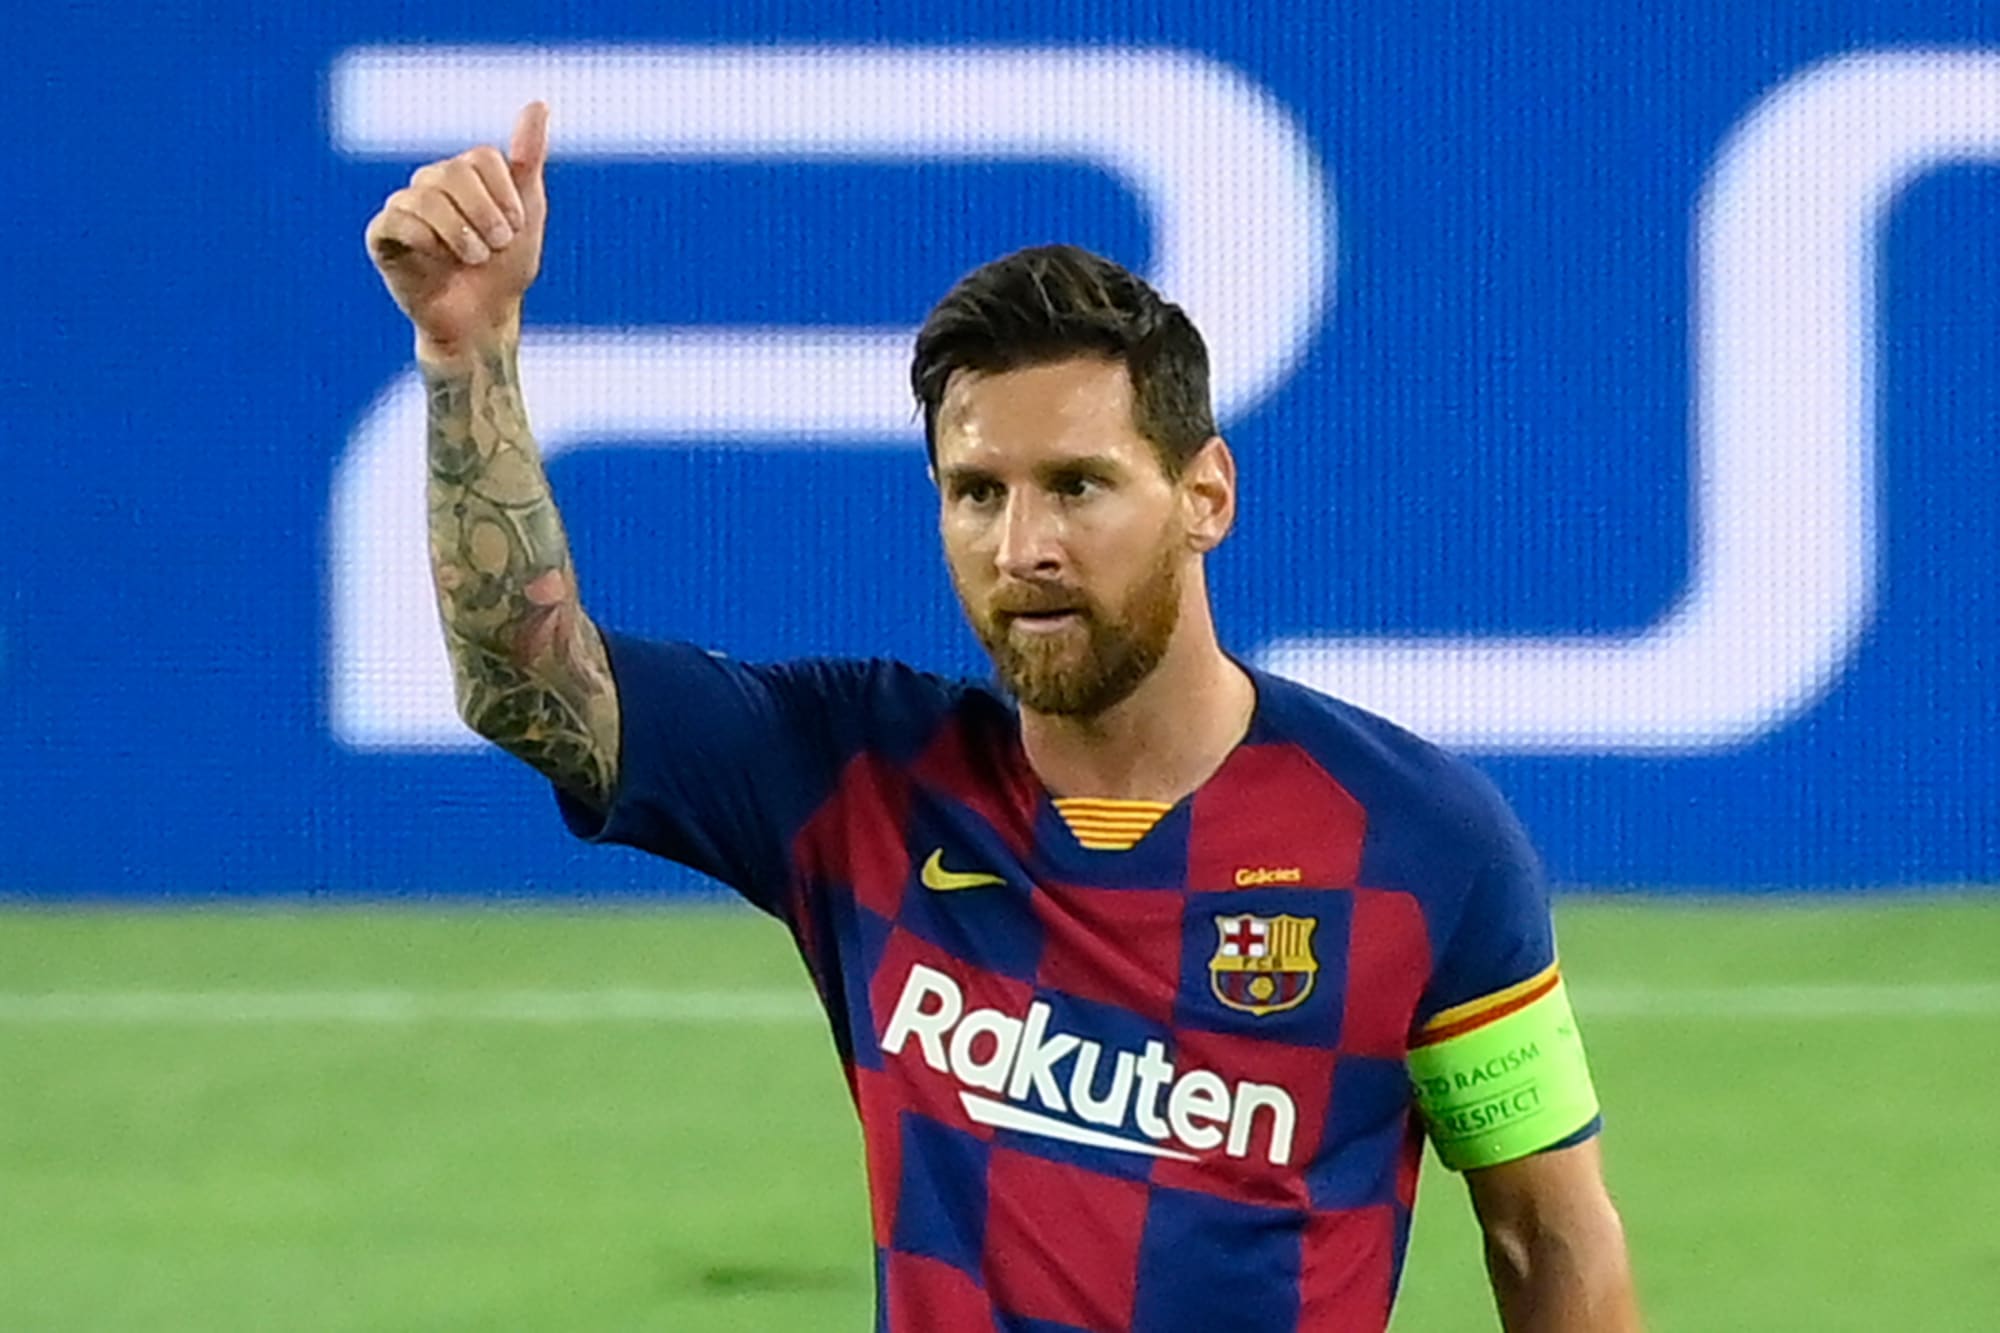 Top 10 Lionel Messi Goals at Barcelona (Spanish Edition)